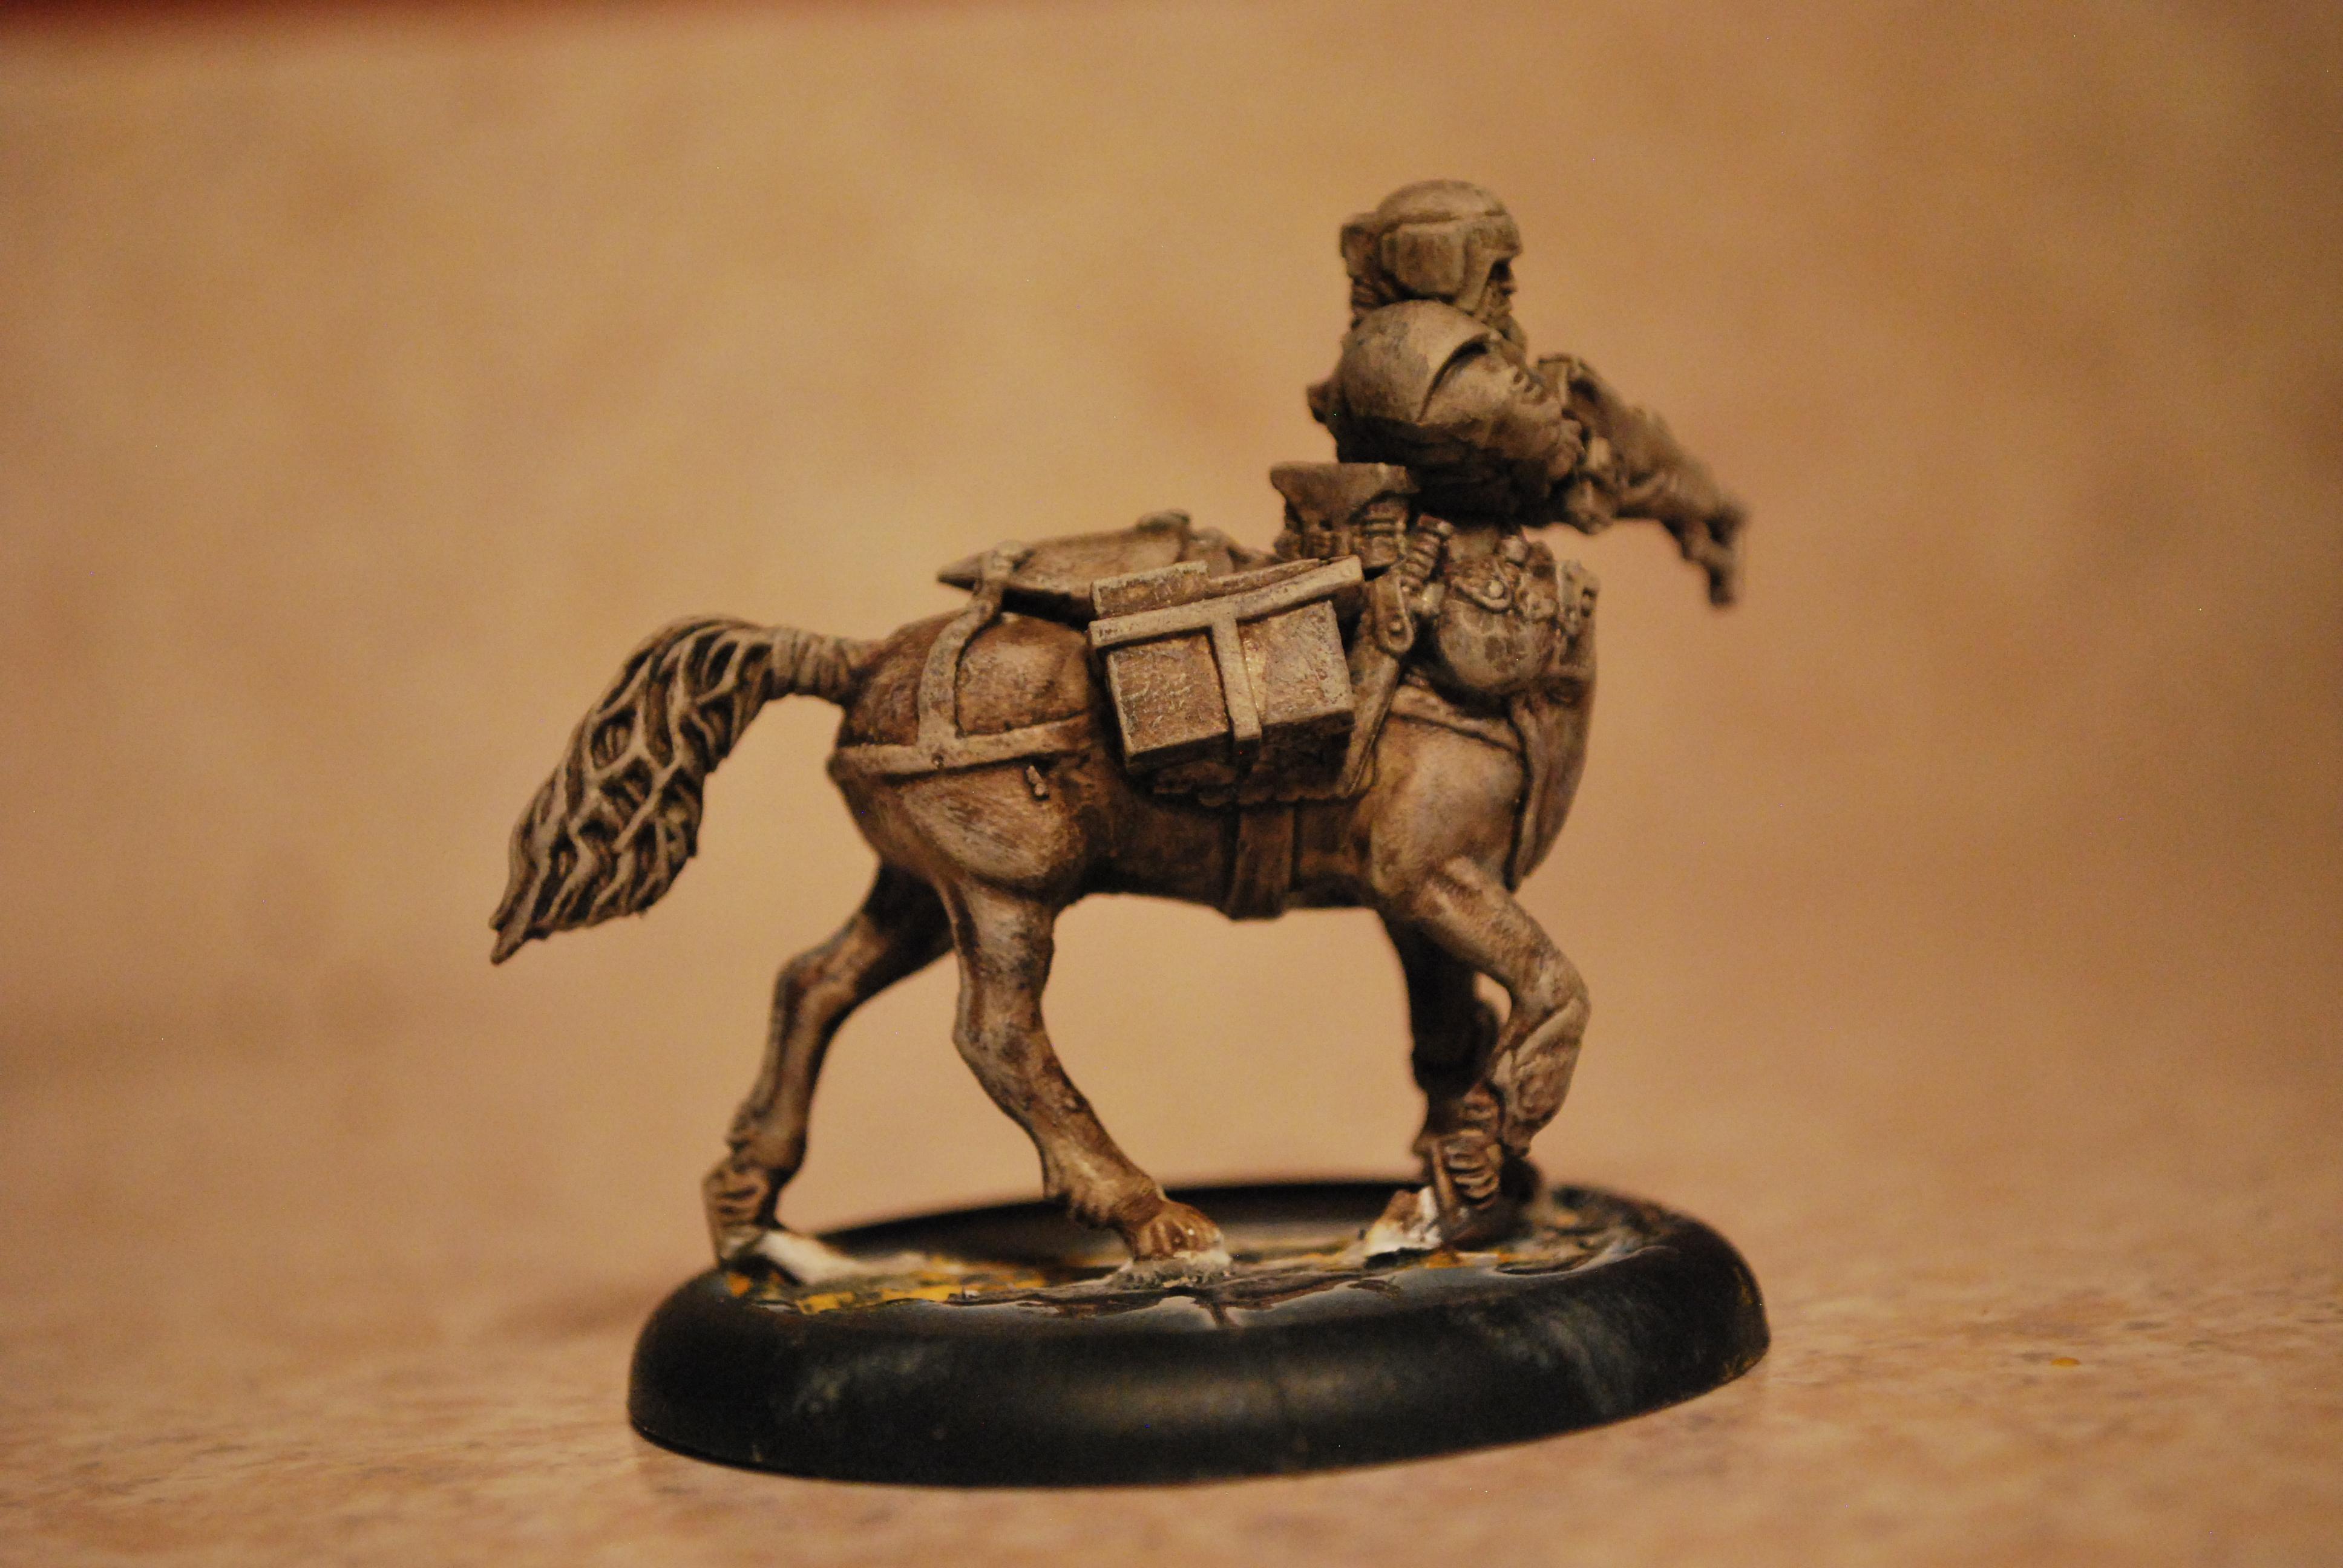 Centaur, Conversion, Custo, Fallout, High Elf Horse, Hybrid, Imperial Guard, Minis, Mutant, Post Apoc, Post Apocalyptic, Pro-create, Prototype, Sculpting, This Is Not A Test